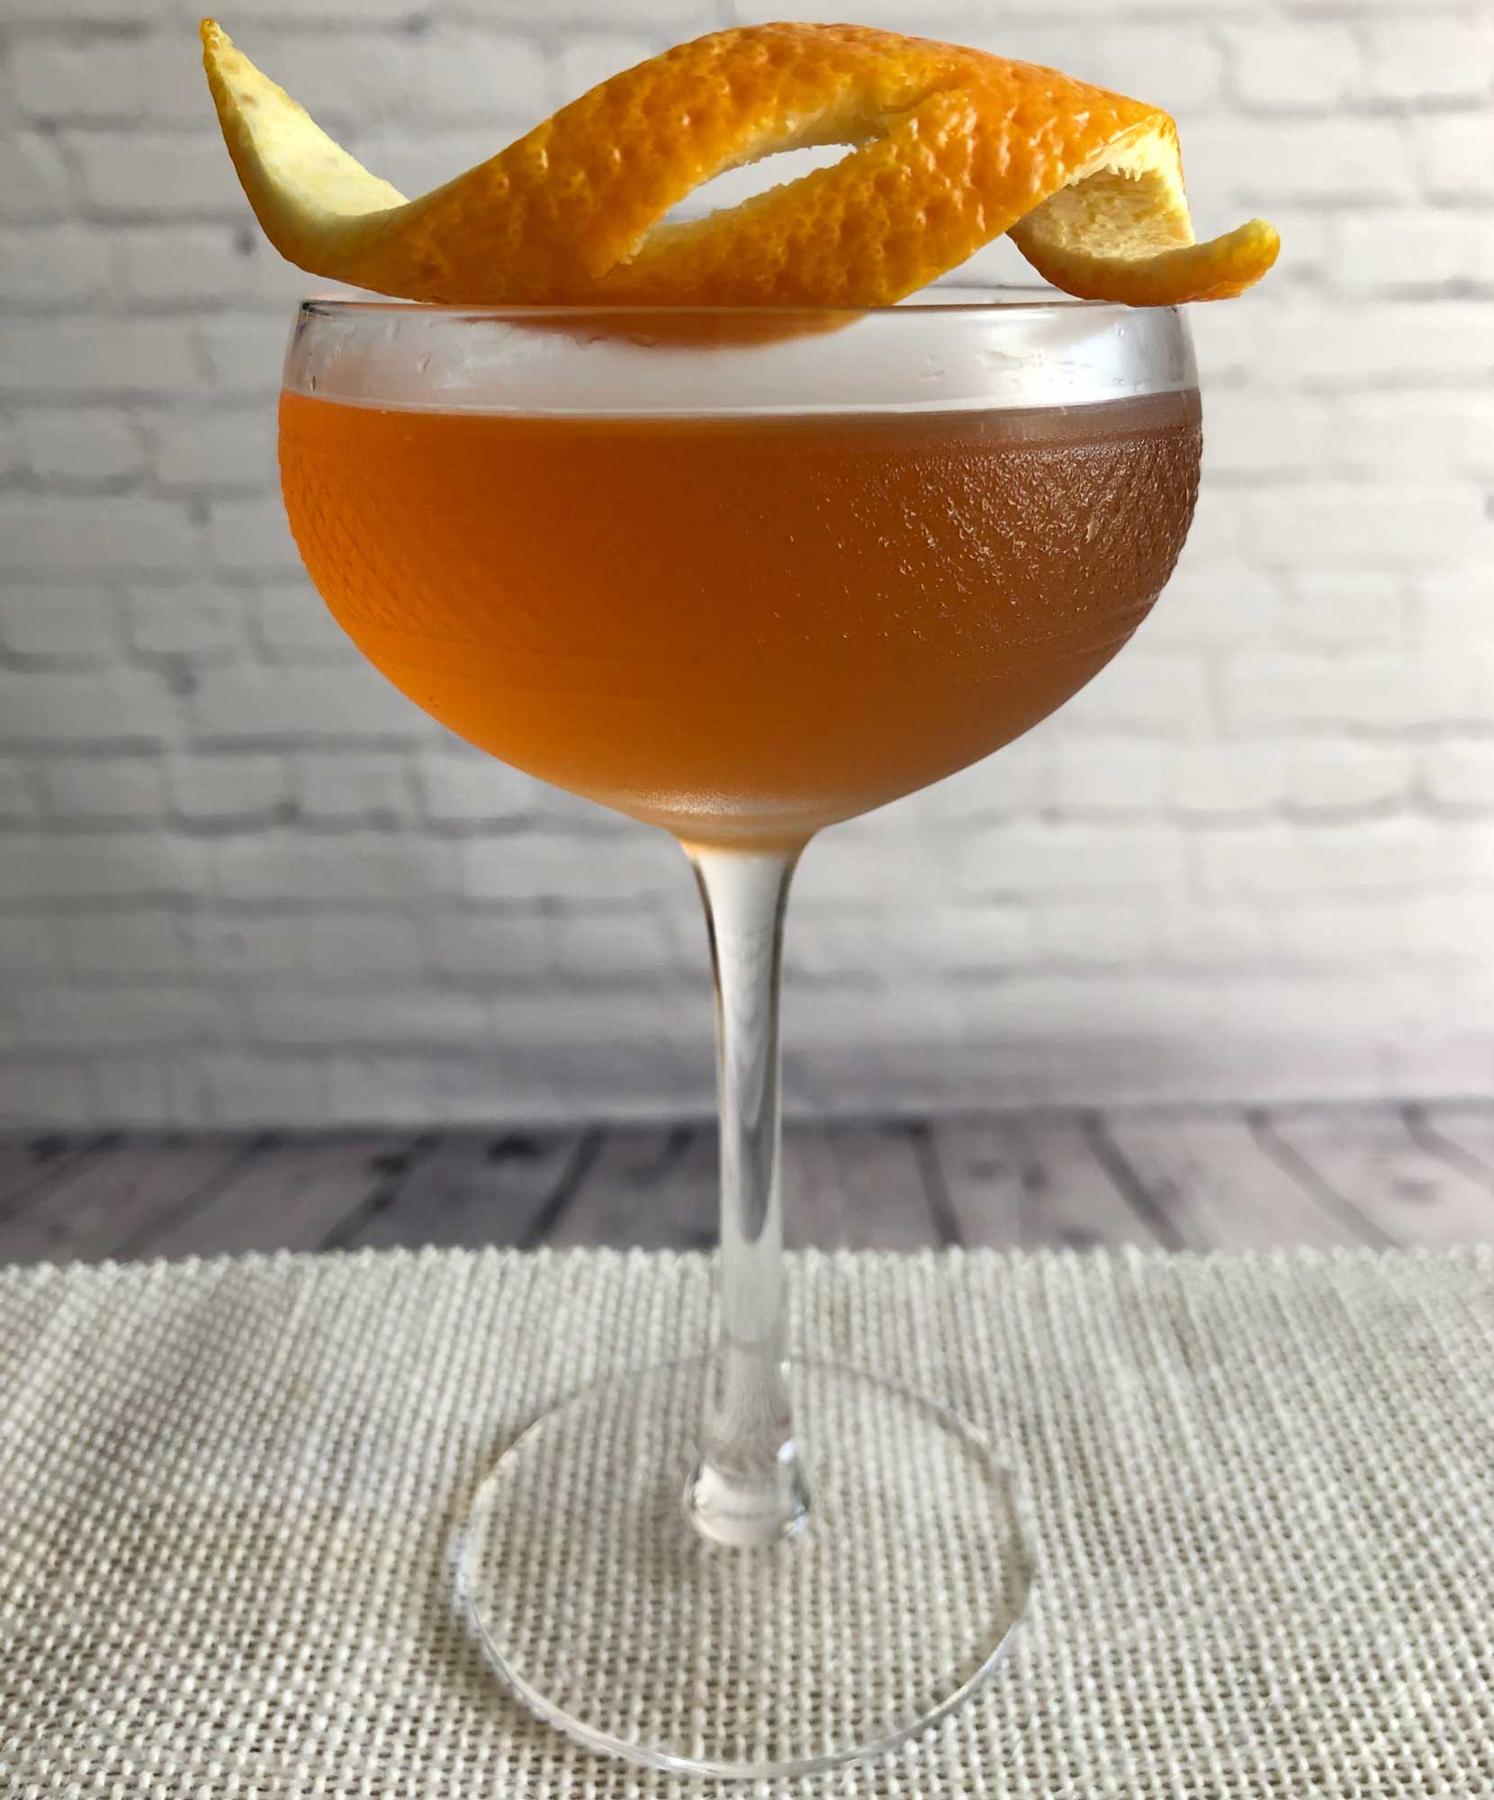 An example of the Boomerang Cocktail, the mixed drink (drink), by Savoy Cocktail Book, featuring KRONAN Swedish Punsch, rye whiskey, Dolin Dry Vermouth de Chambéry, lemon juice, Angostura bitters, orange bitters, and lemon twist; photo by Lee Edwards